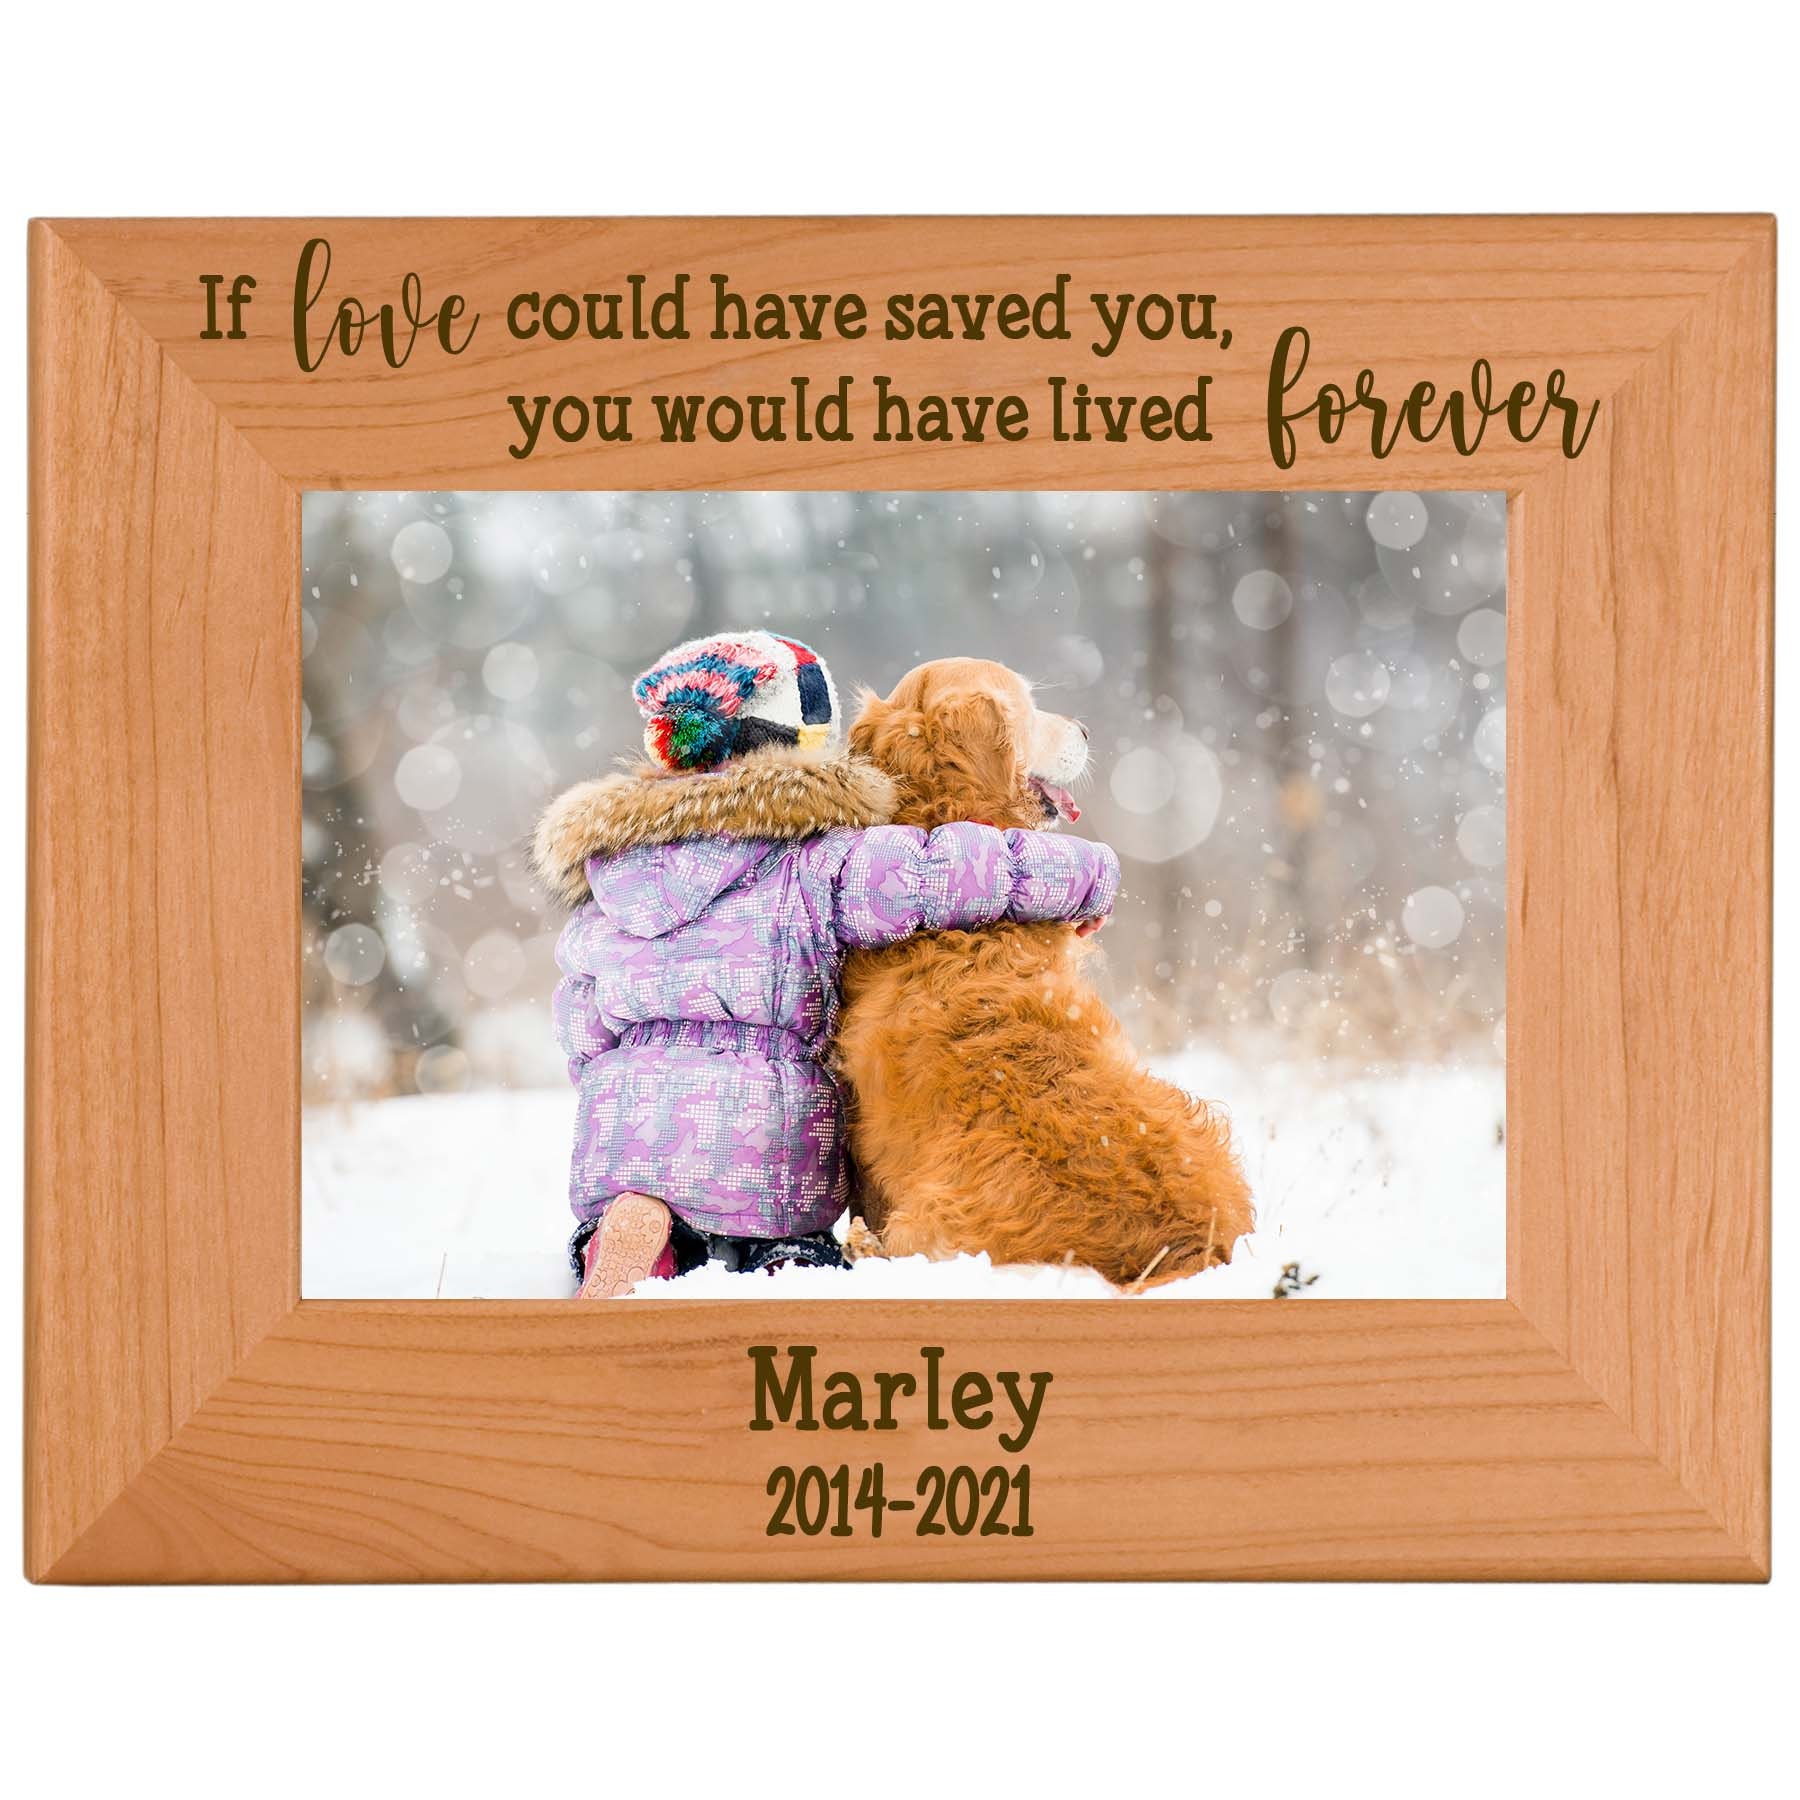 Cat Memorial Dog Memorial Picture Frame 4x6 Pet Custom Laser Engraved Frame If love could have saved you you would have lived forever